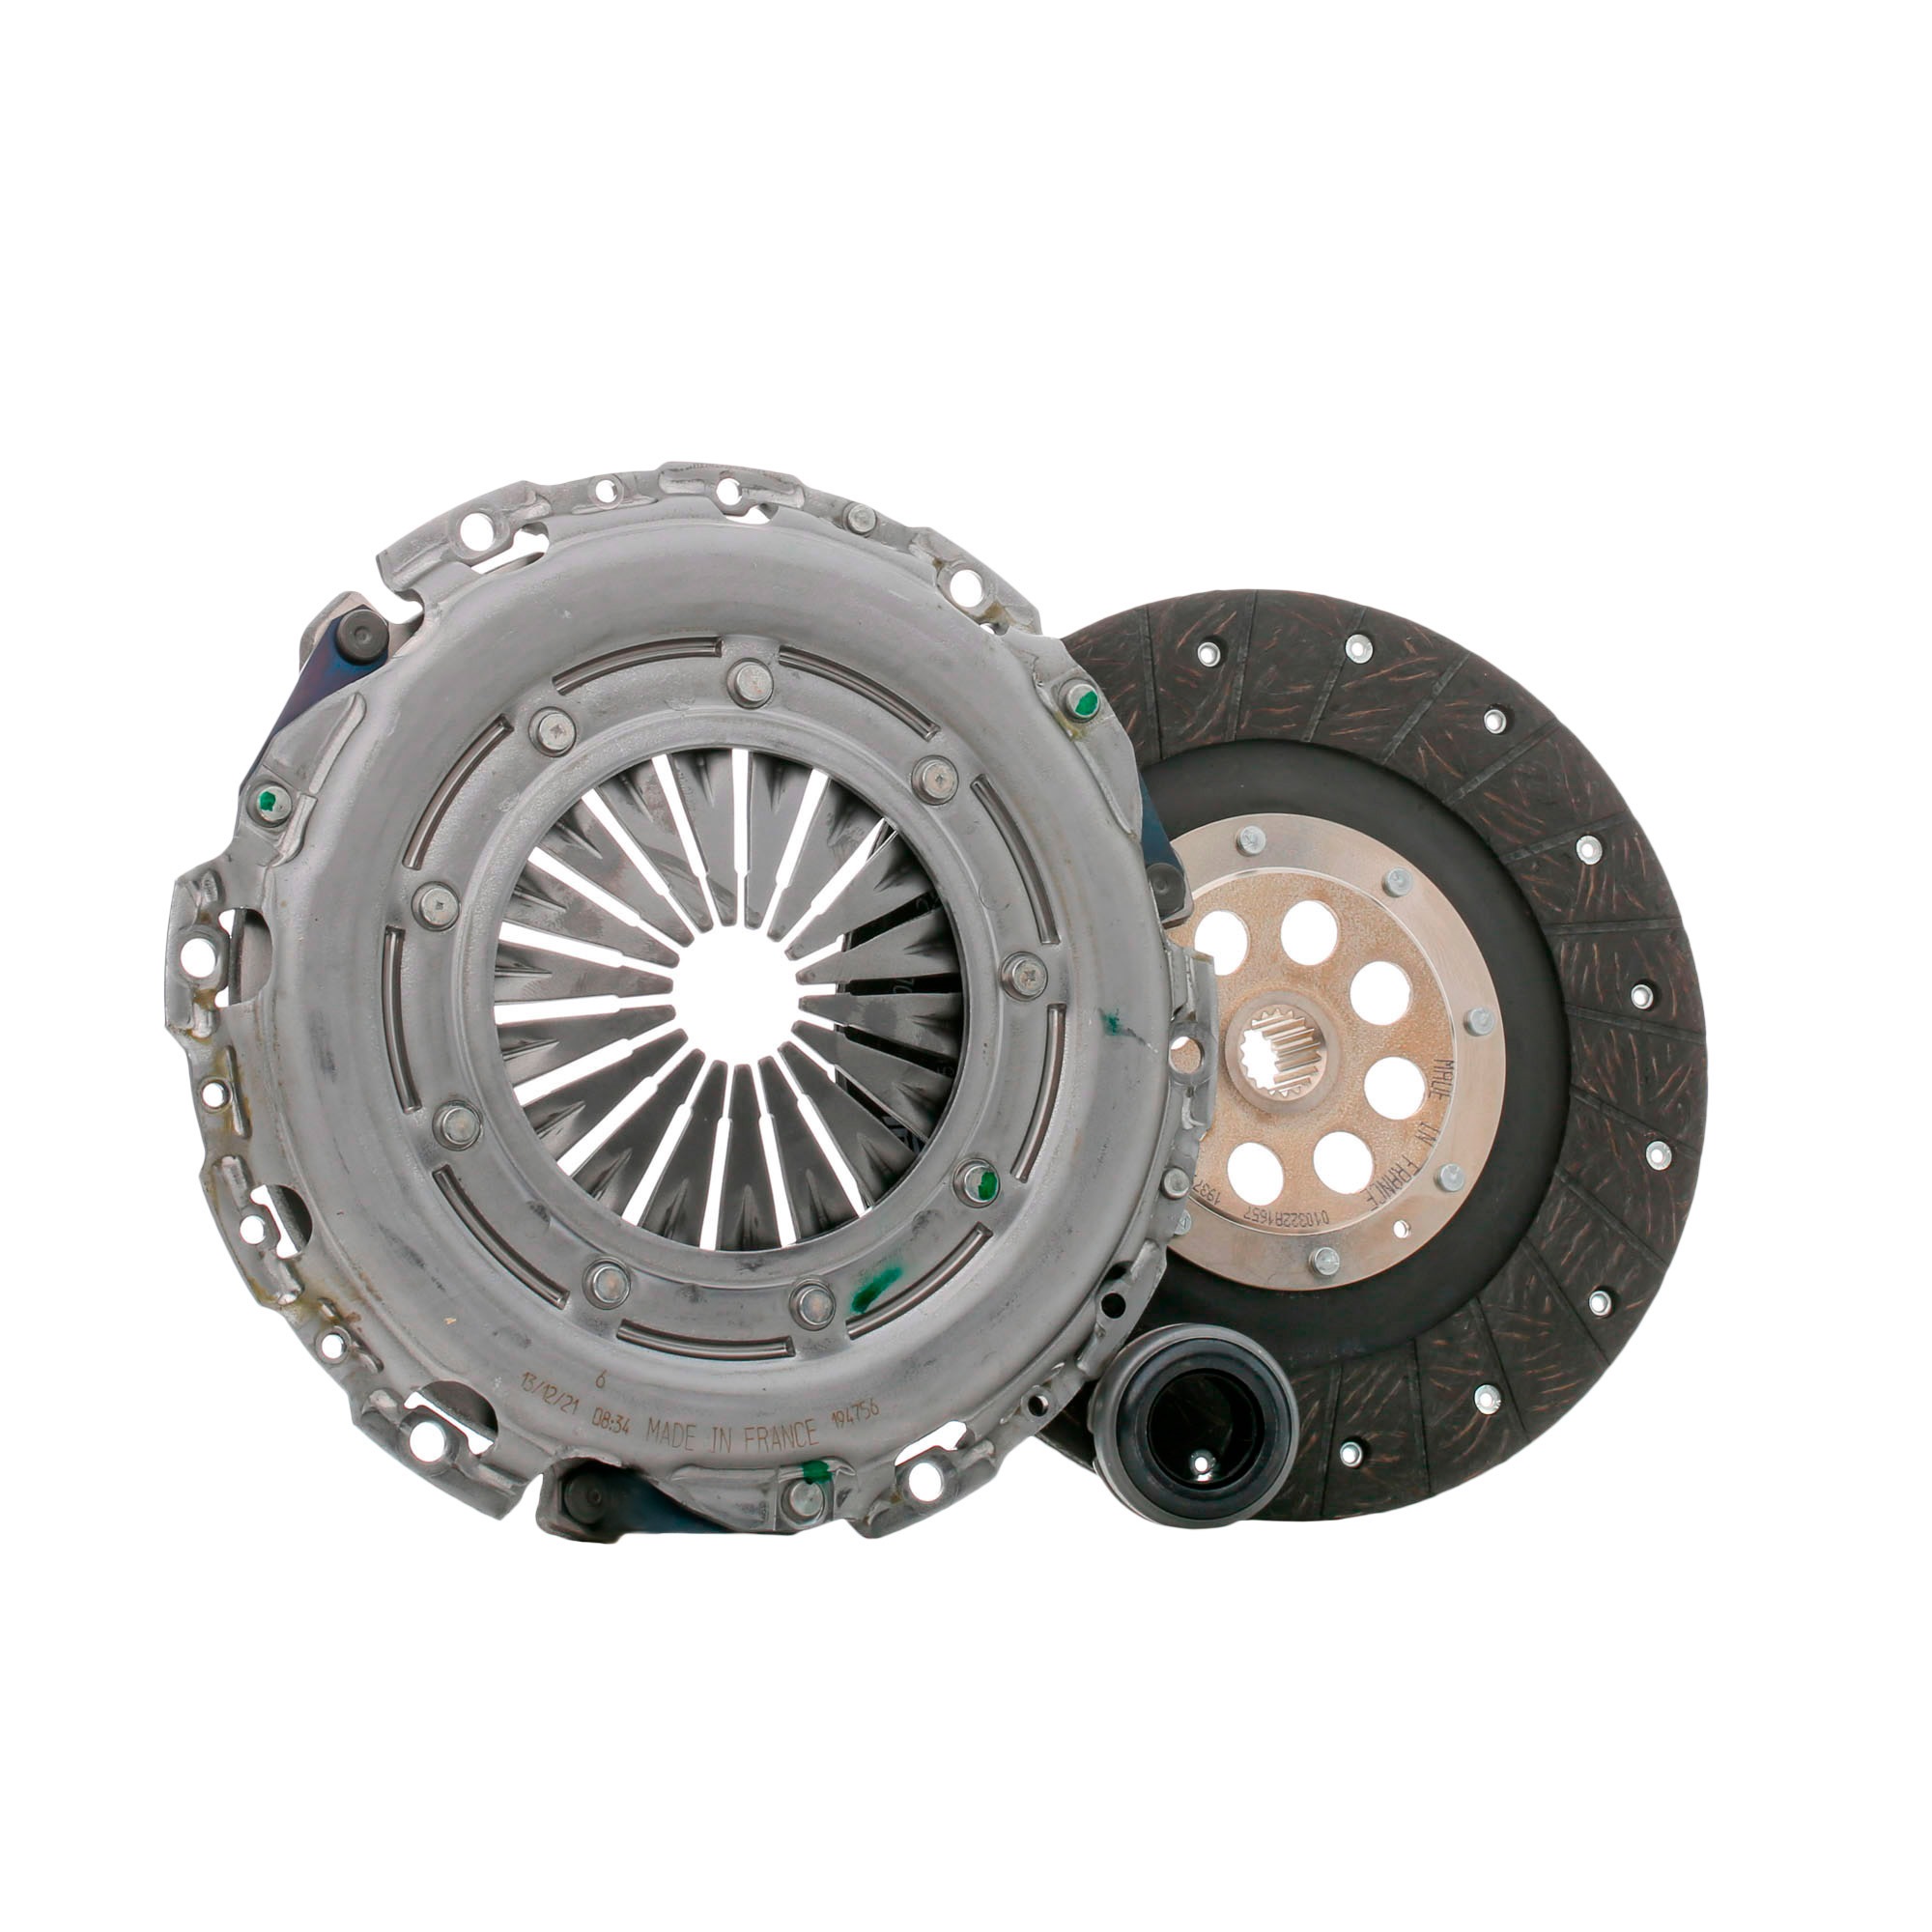 VALEO Clutch replacement kit Peugeot 407 SW new 826550